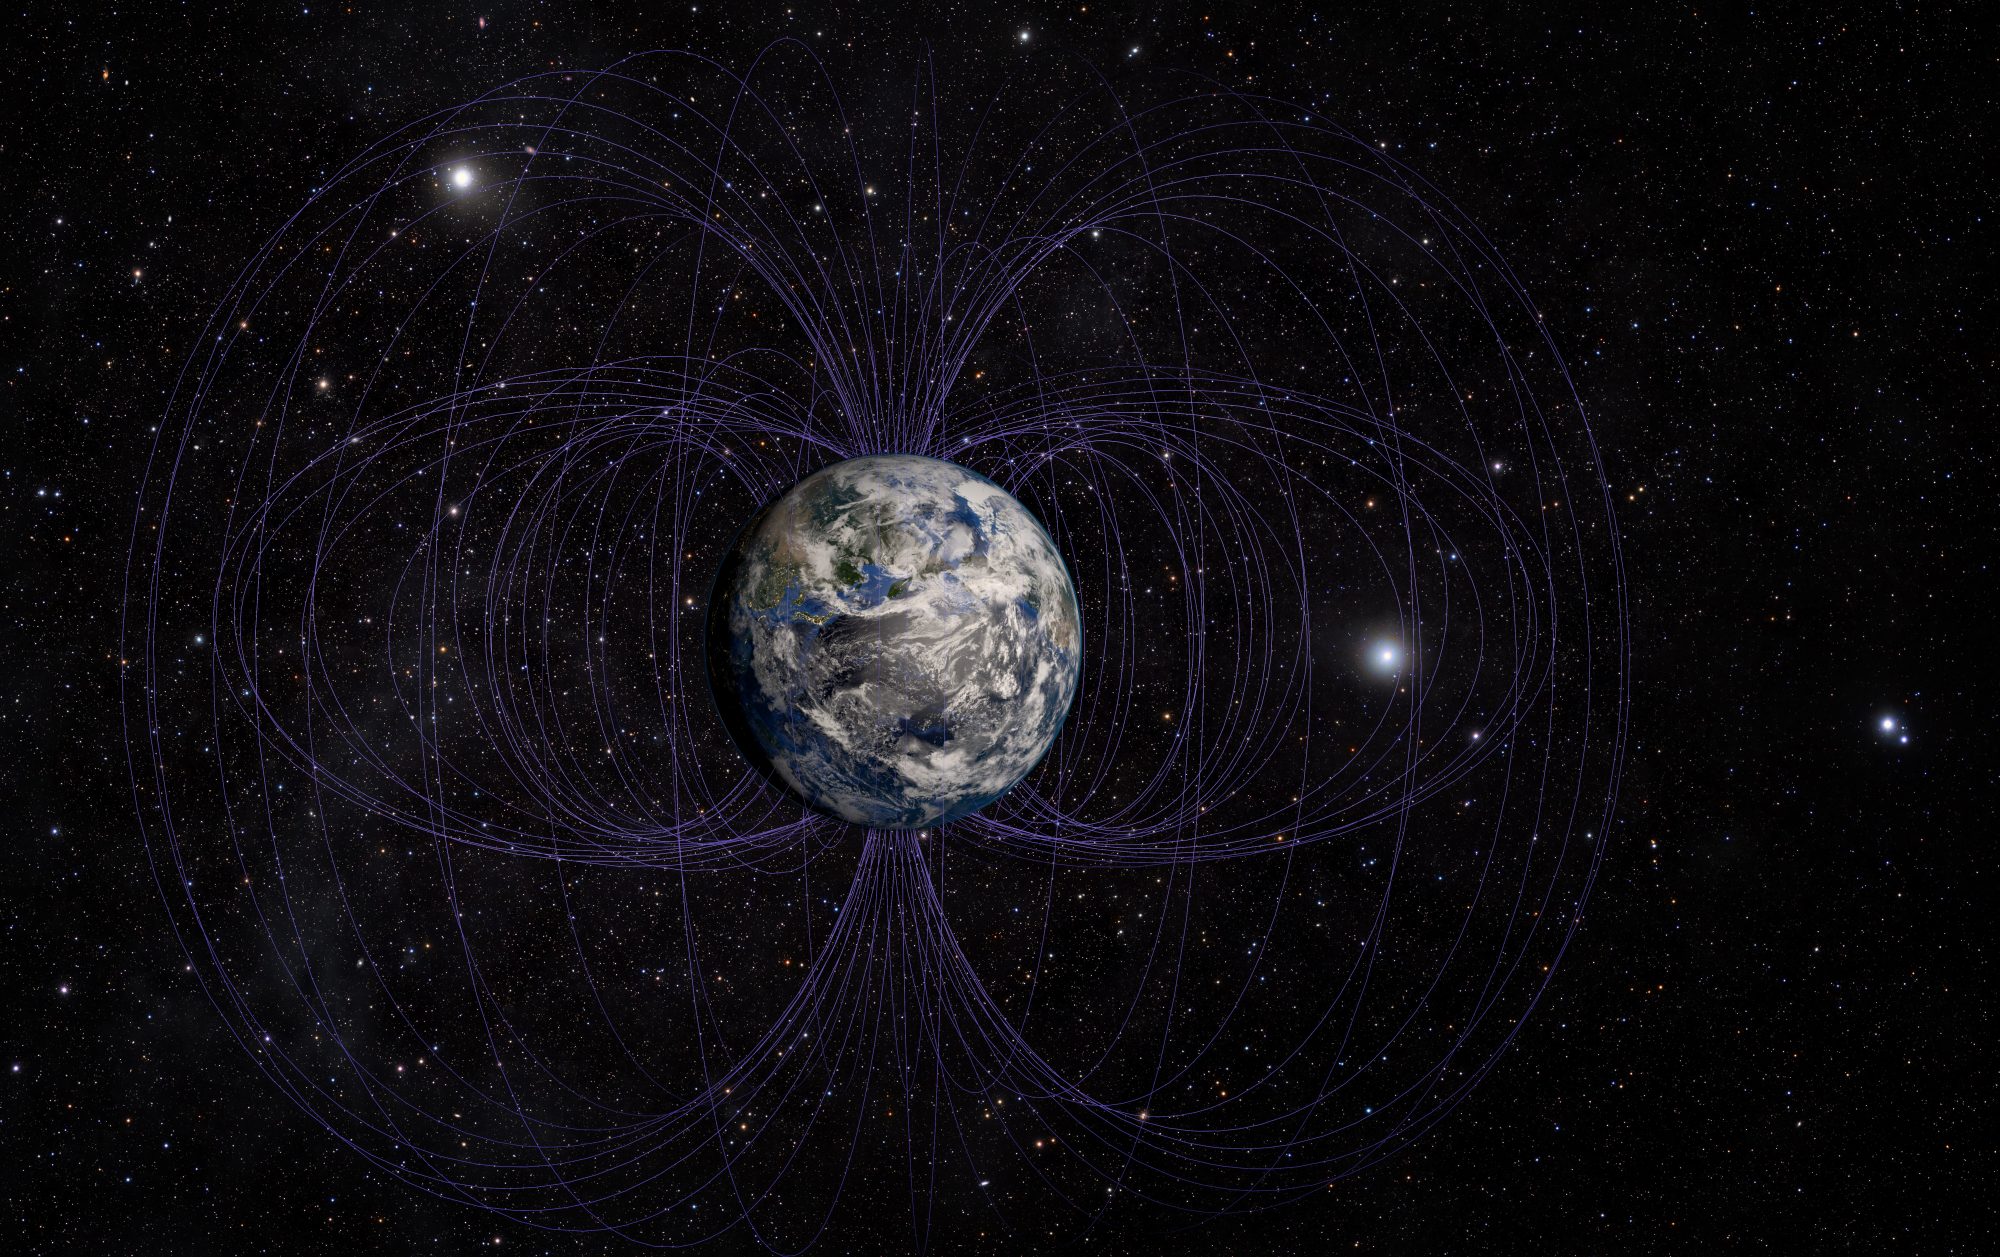 3D rendering of the earths magnetic field lines